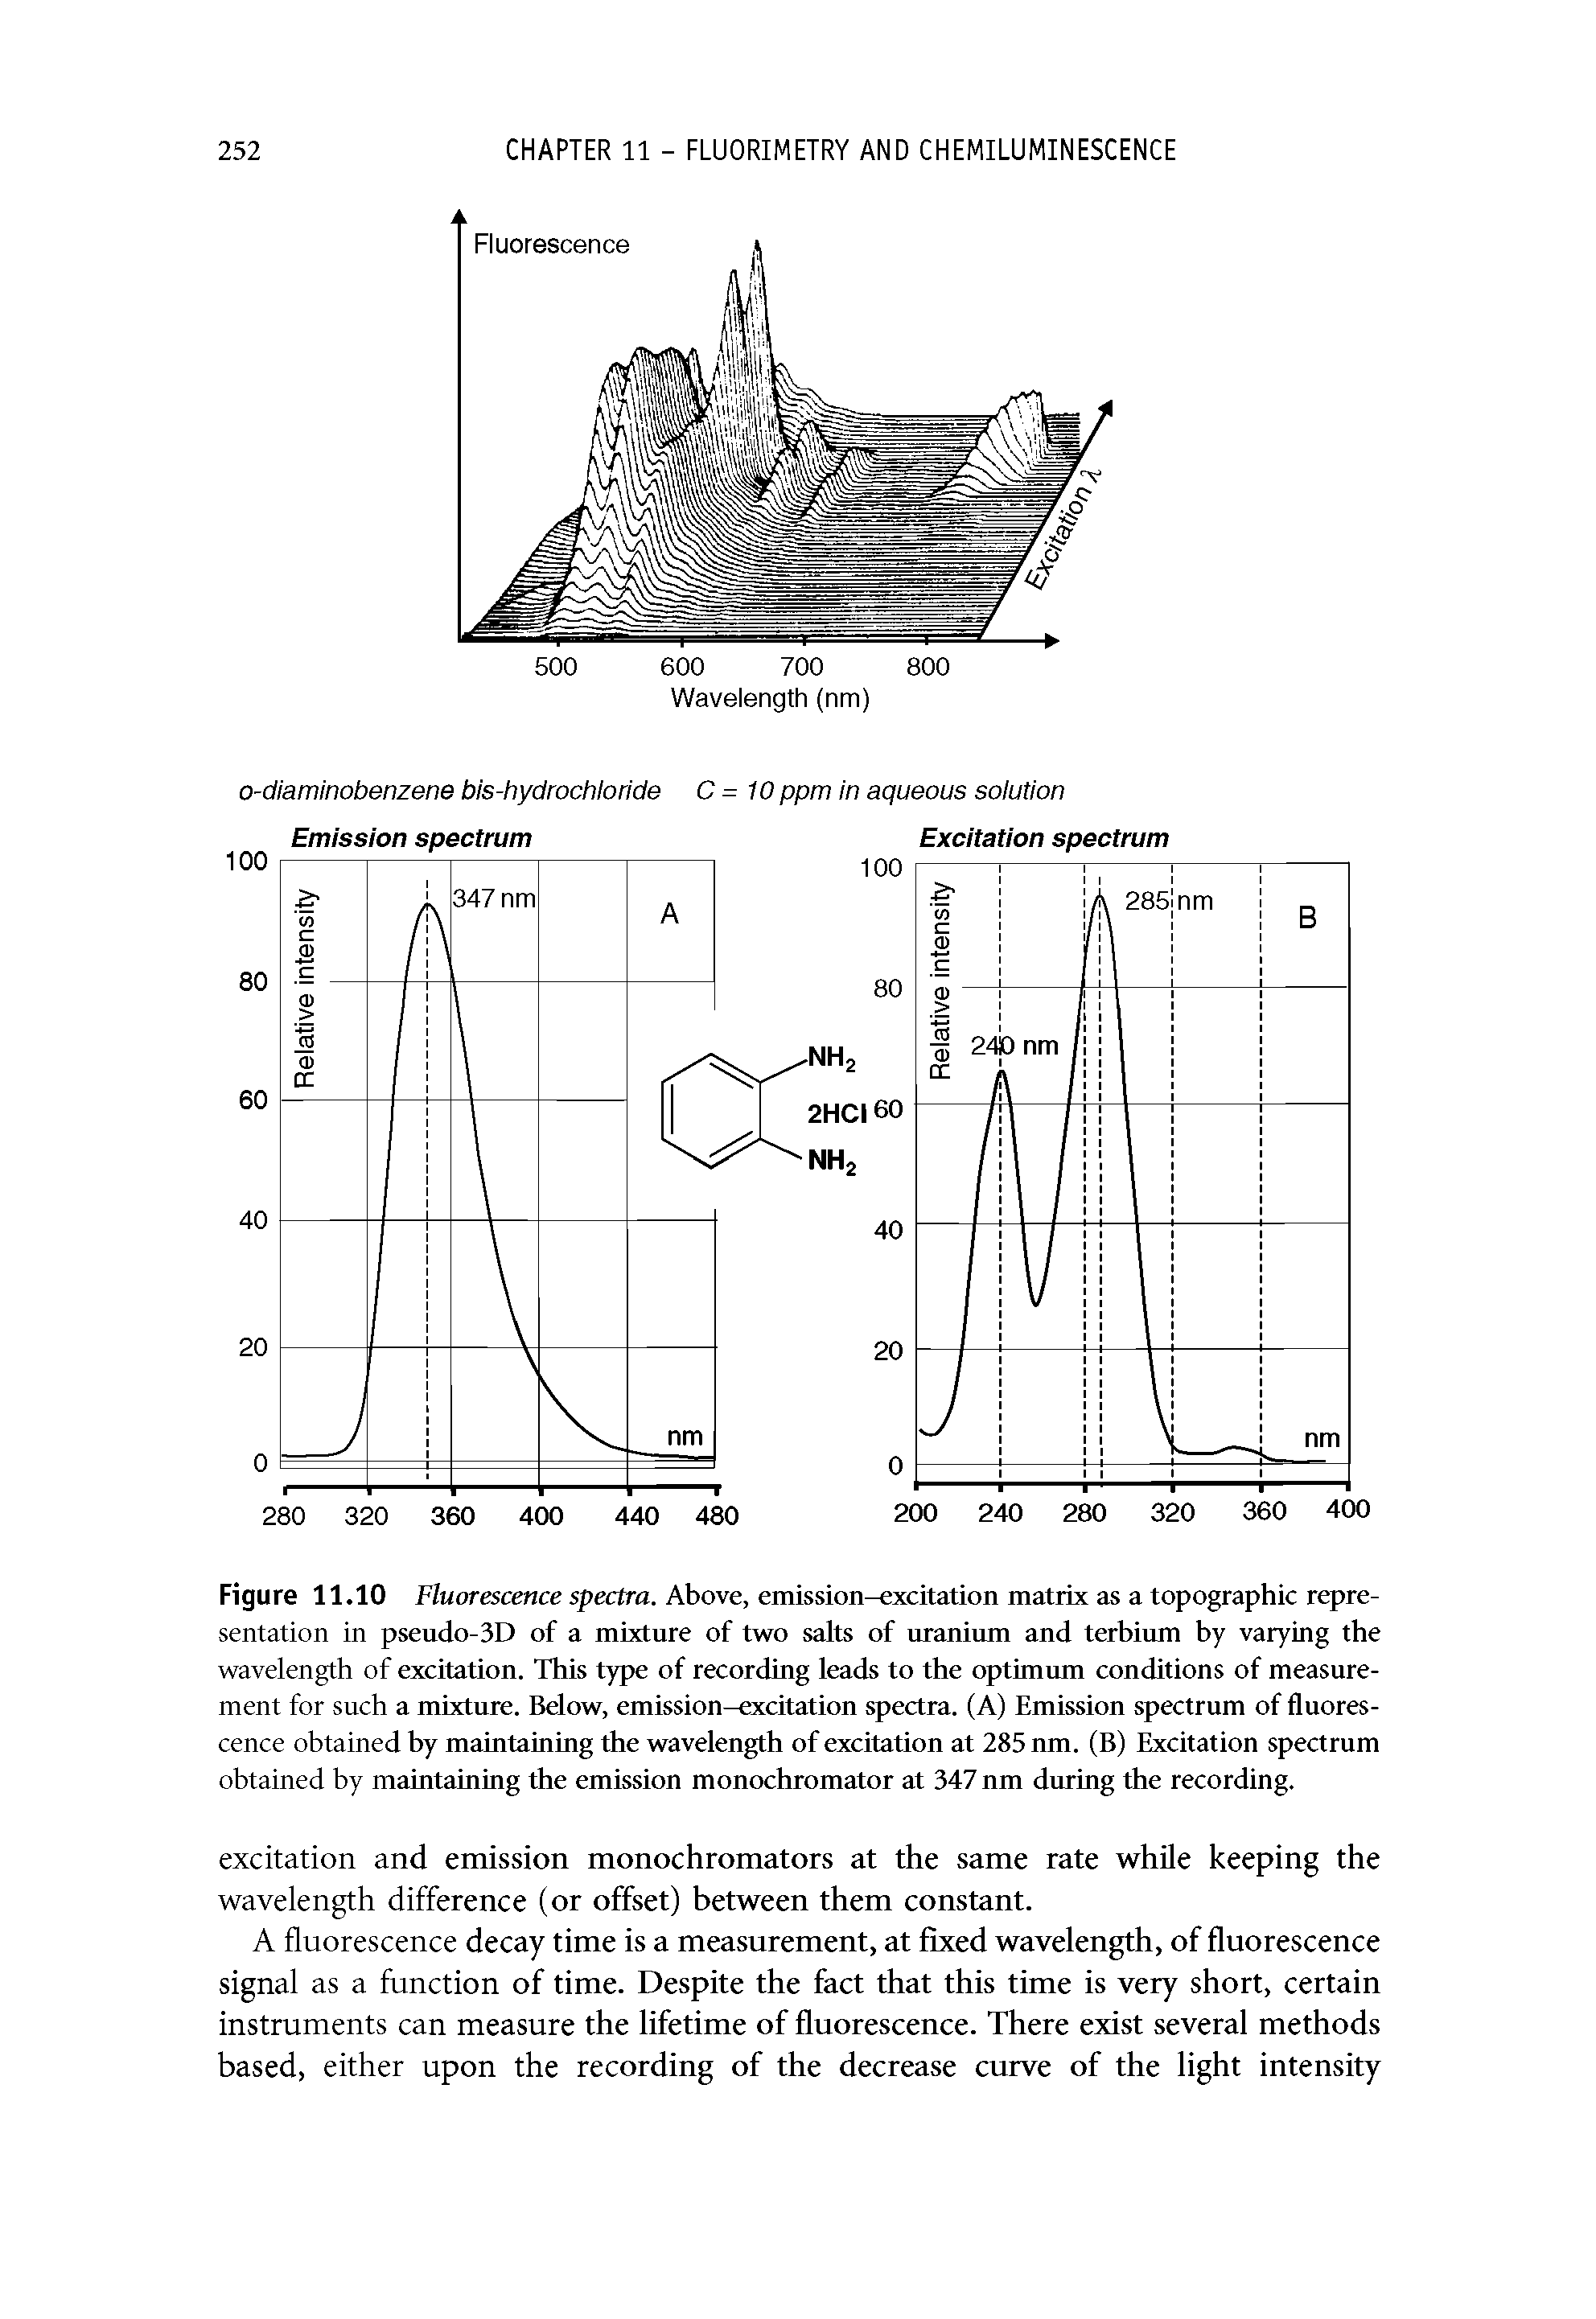 Figure 11.10 Fluorescence spectra. Above, emission-excitation matrix as a topographic representation in pseudo-3D of a mixture of two salts of uranium and terbium by varying the wavelength of excitation. This type of recording leads to the optimum conditions of measurement for such a mixture. Below, emission-excitation spectra. (A) Emission spectrum of fluorescence obtained by maintaining the wavelength of excitation at 285 nm. (B) Excitation spectrum obtained by maintaining the emission monochromator at 347 nm during the recording.